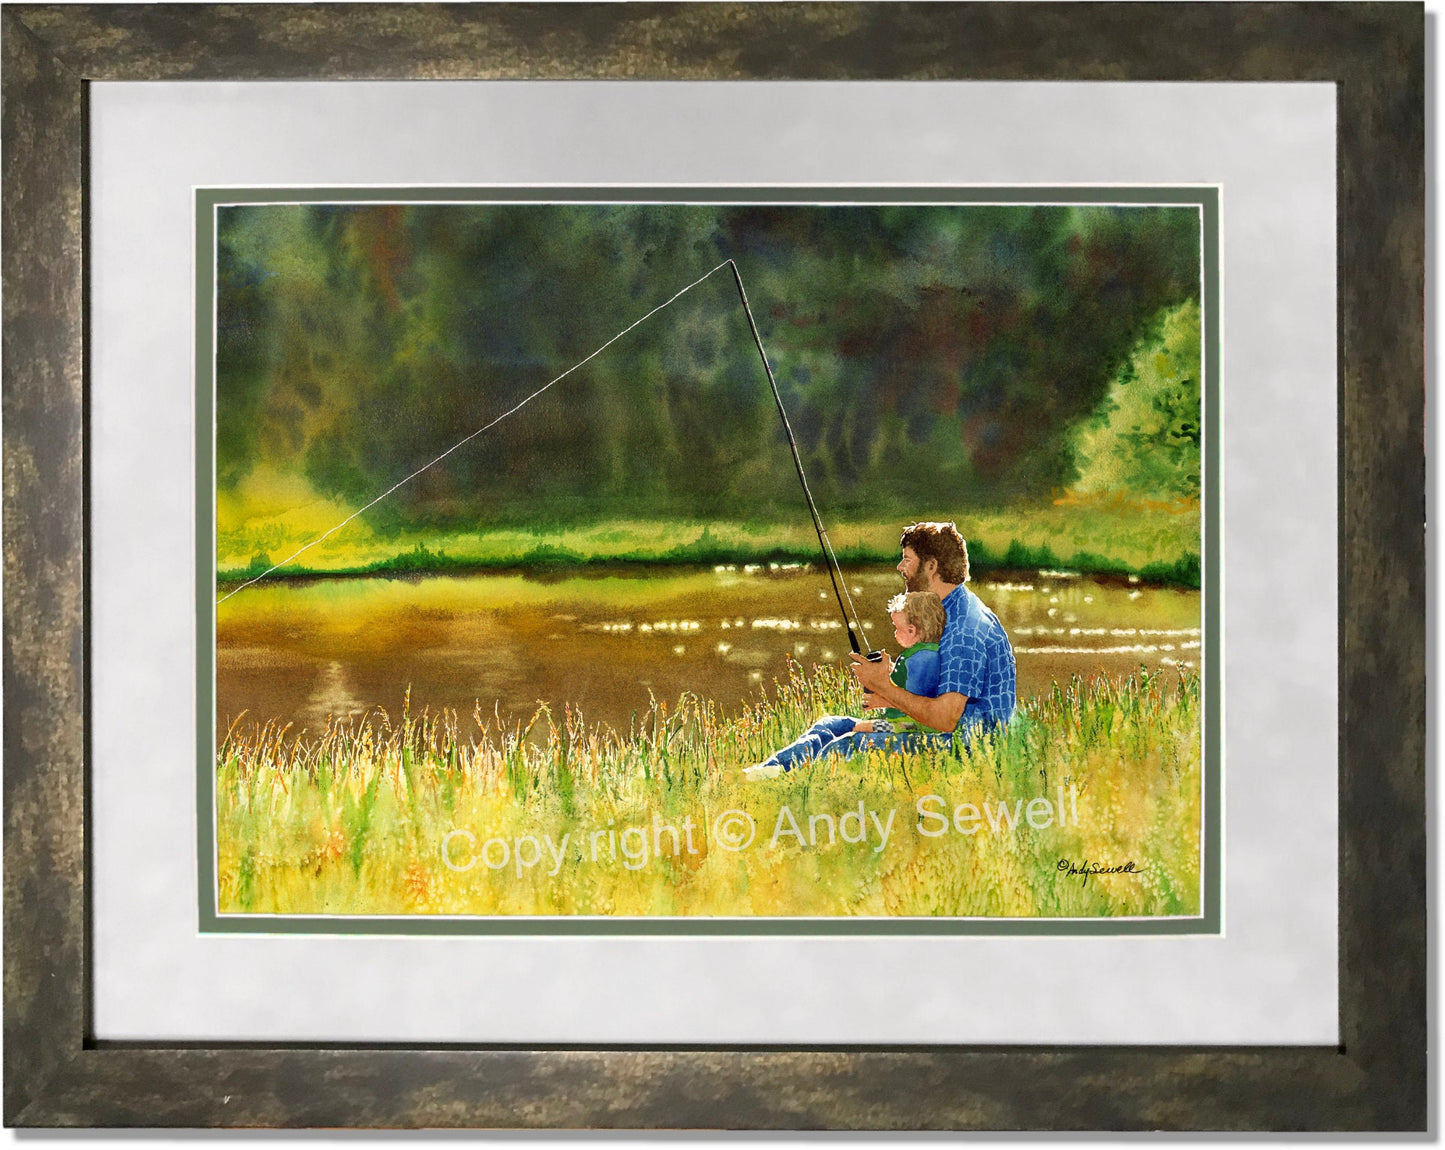 "First Fish" 20x32 art print - a ltd. edition s/n giclee watercolor print of my son fishing with me!